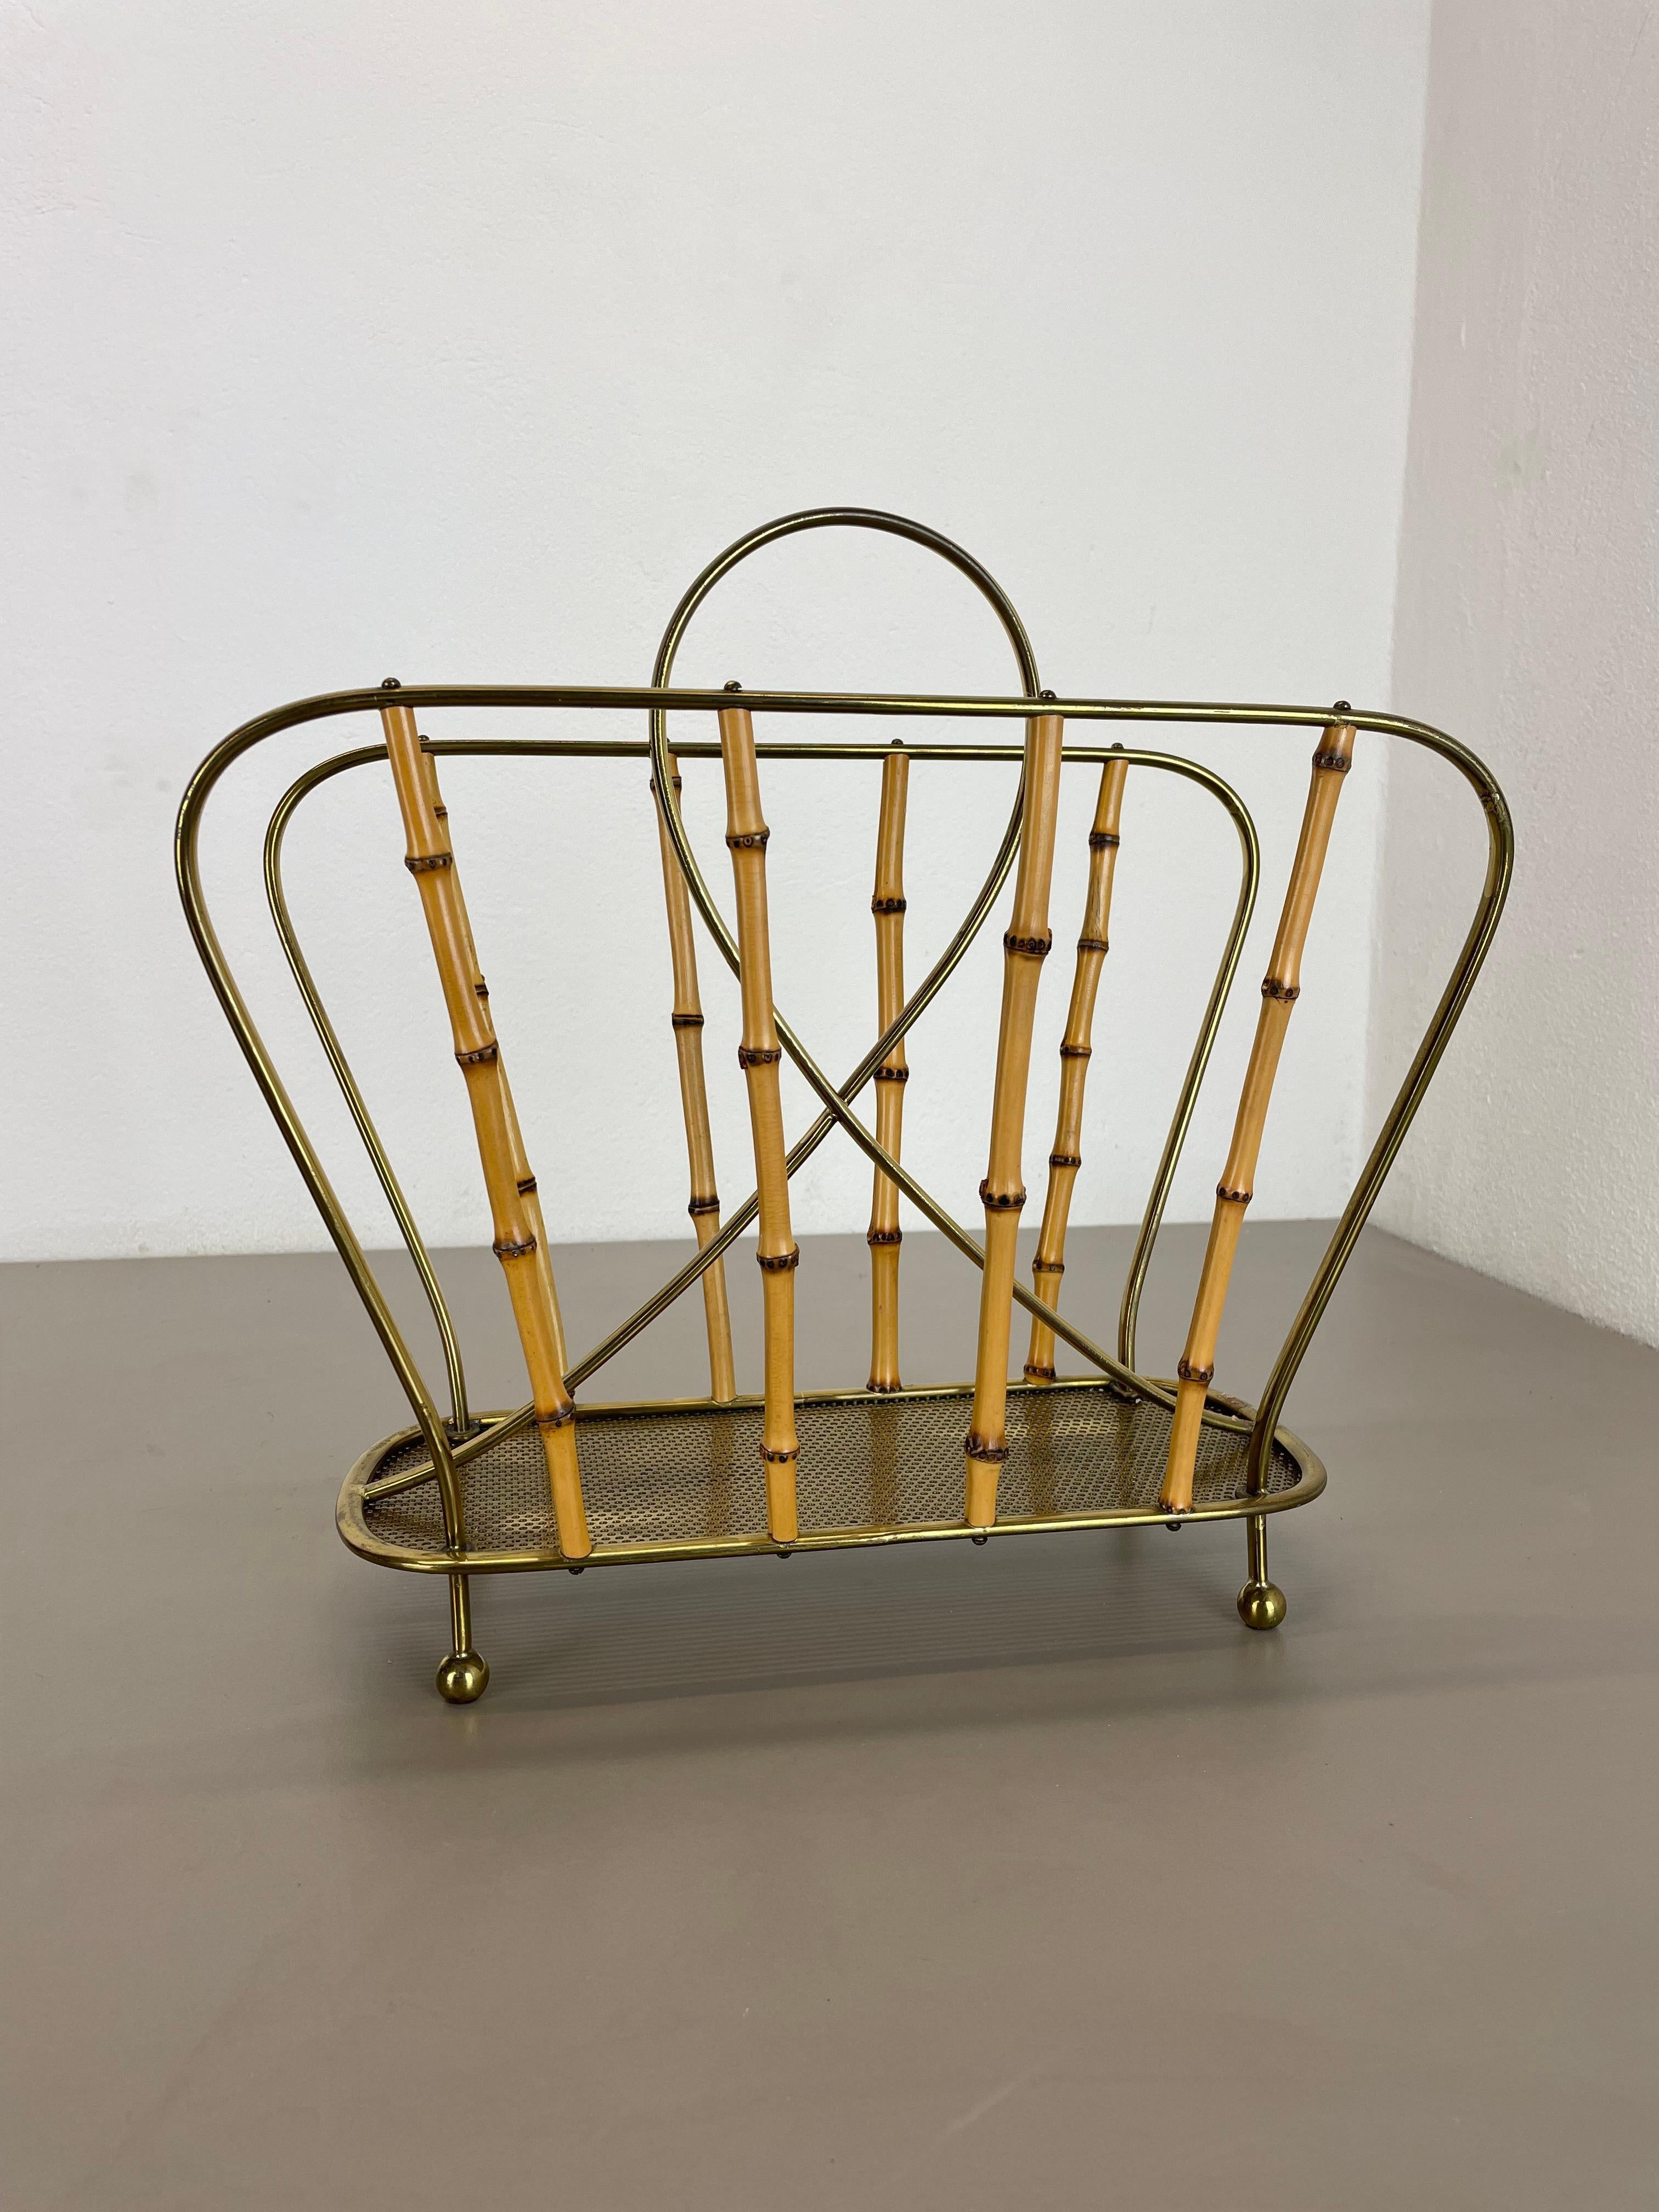 Article: magazine holder stand element

Origin: Austria

Age: 1950s

This original vintage Auböck style magazine holder stand was produced in the 1950s in Austria. It is made of brass, metal and bamboo with metal base in hole pattern optic combined